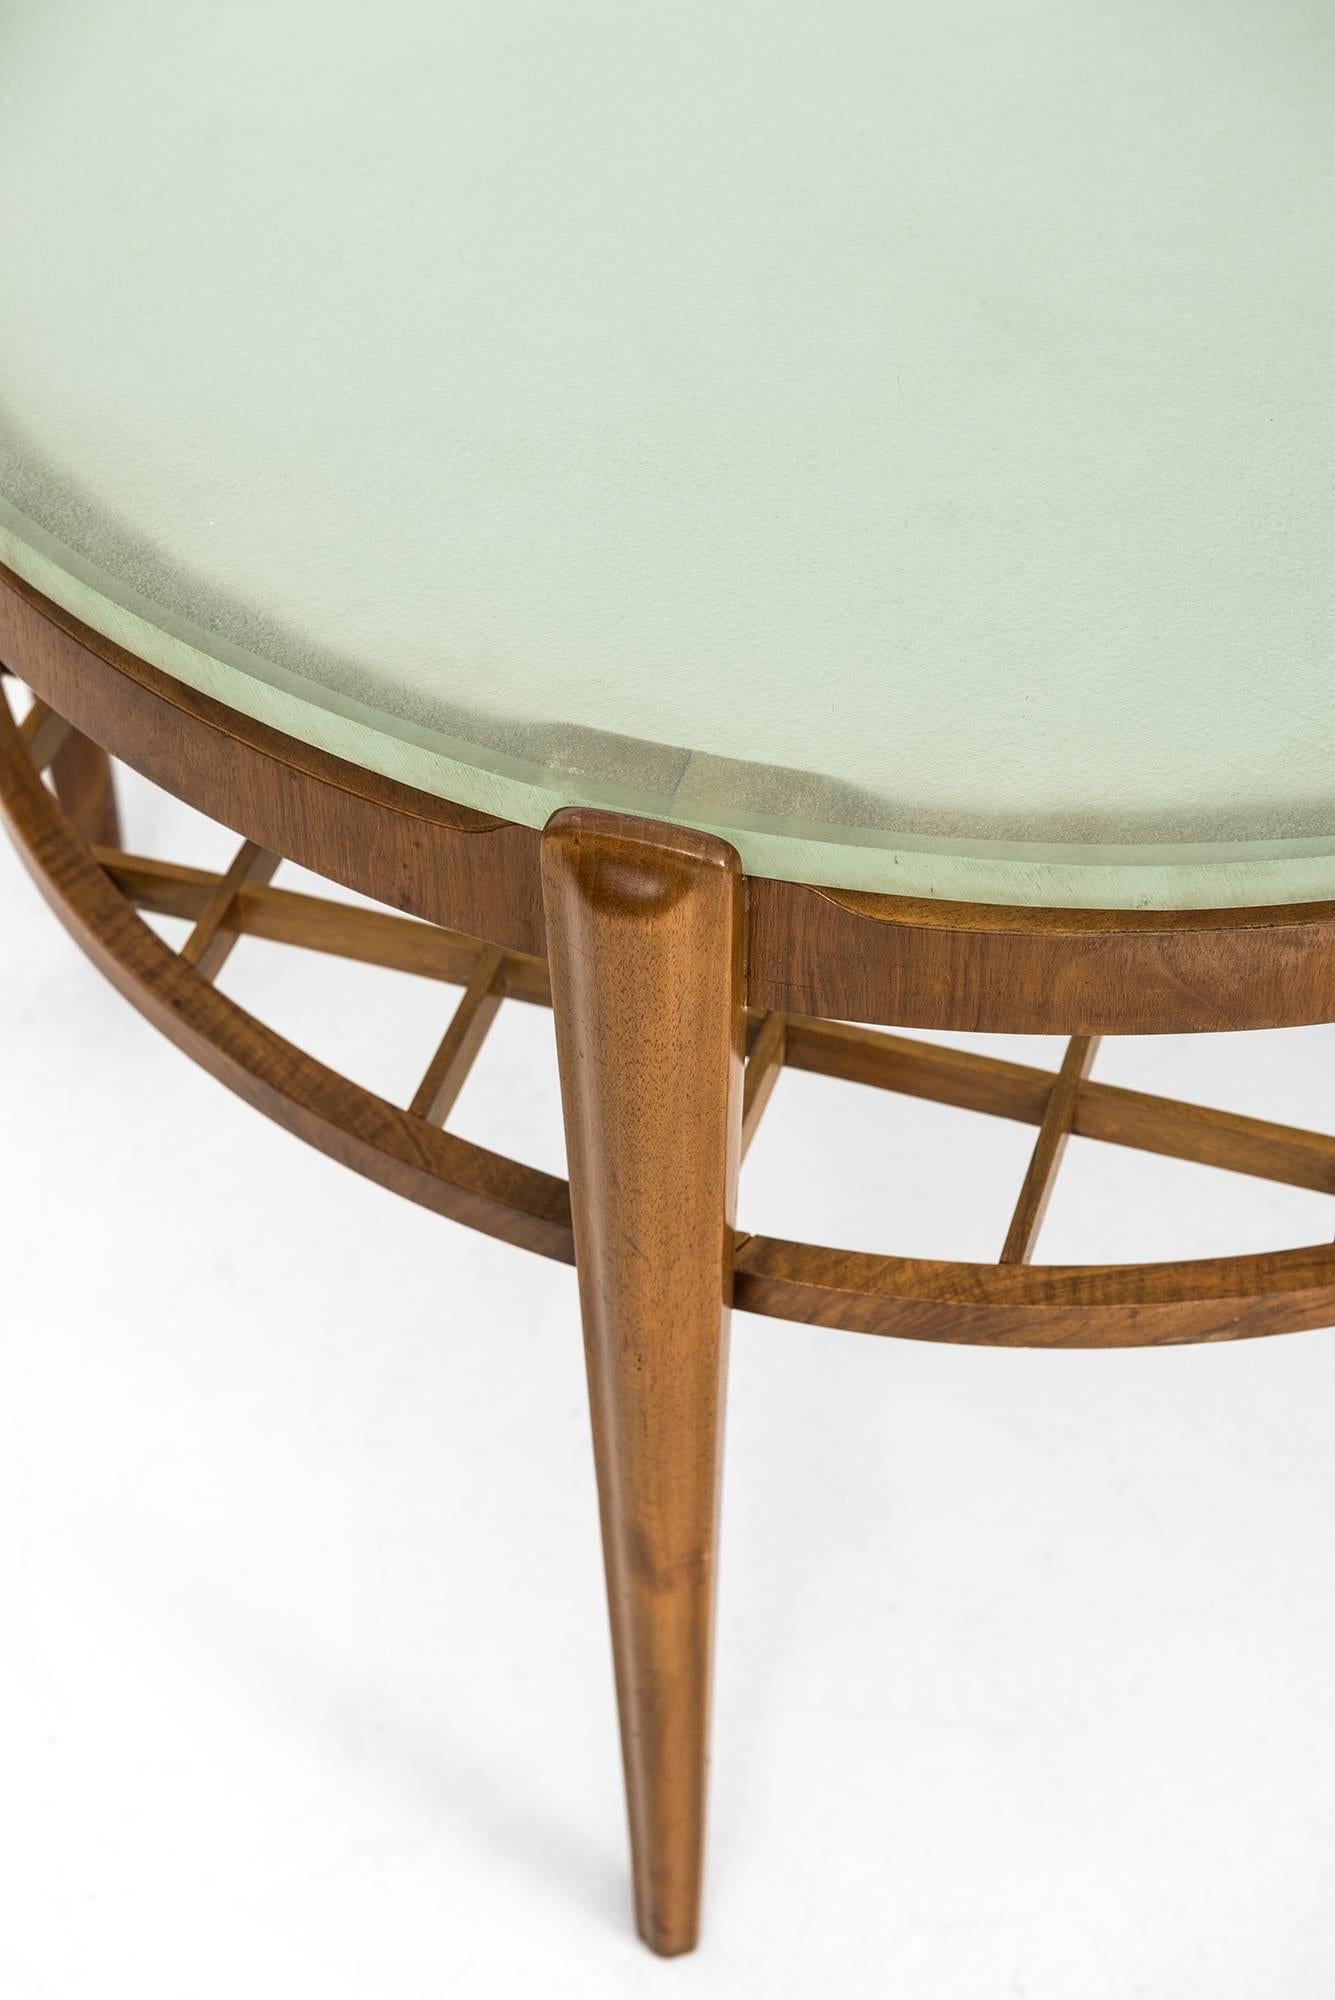 Mid-20th Century Coffee / Side Table Attributed to Carl-Axel Acking and Produced by Bodafors